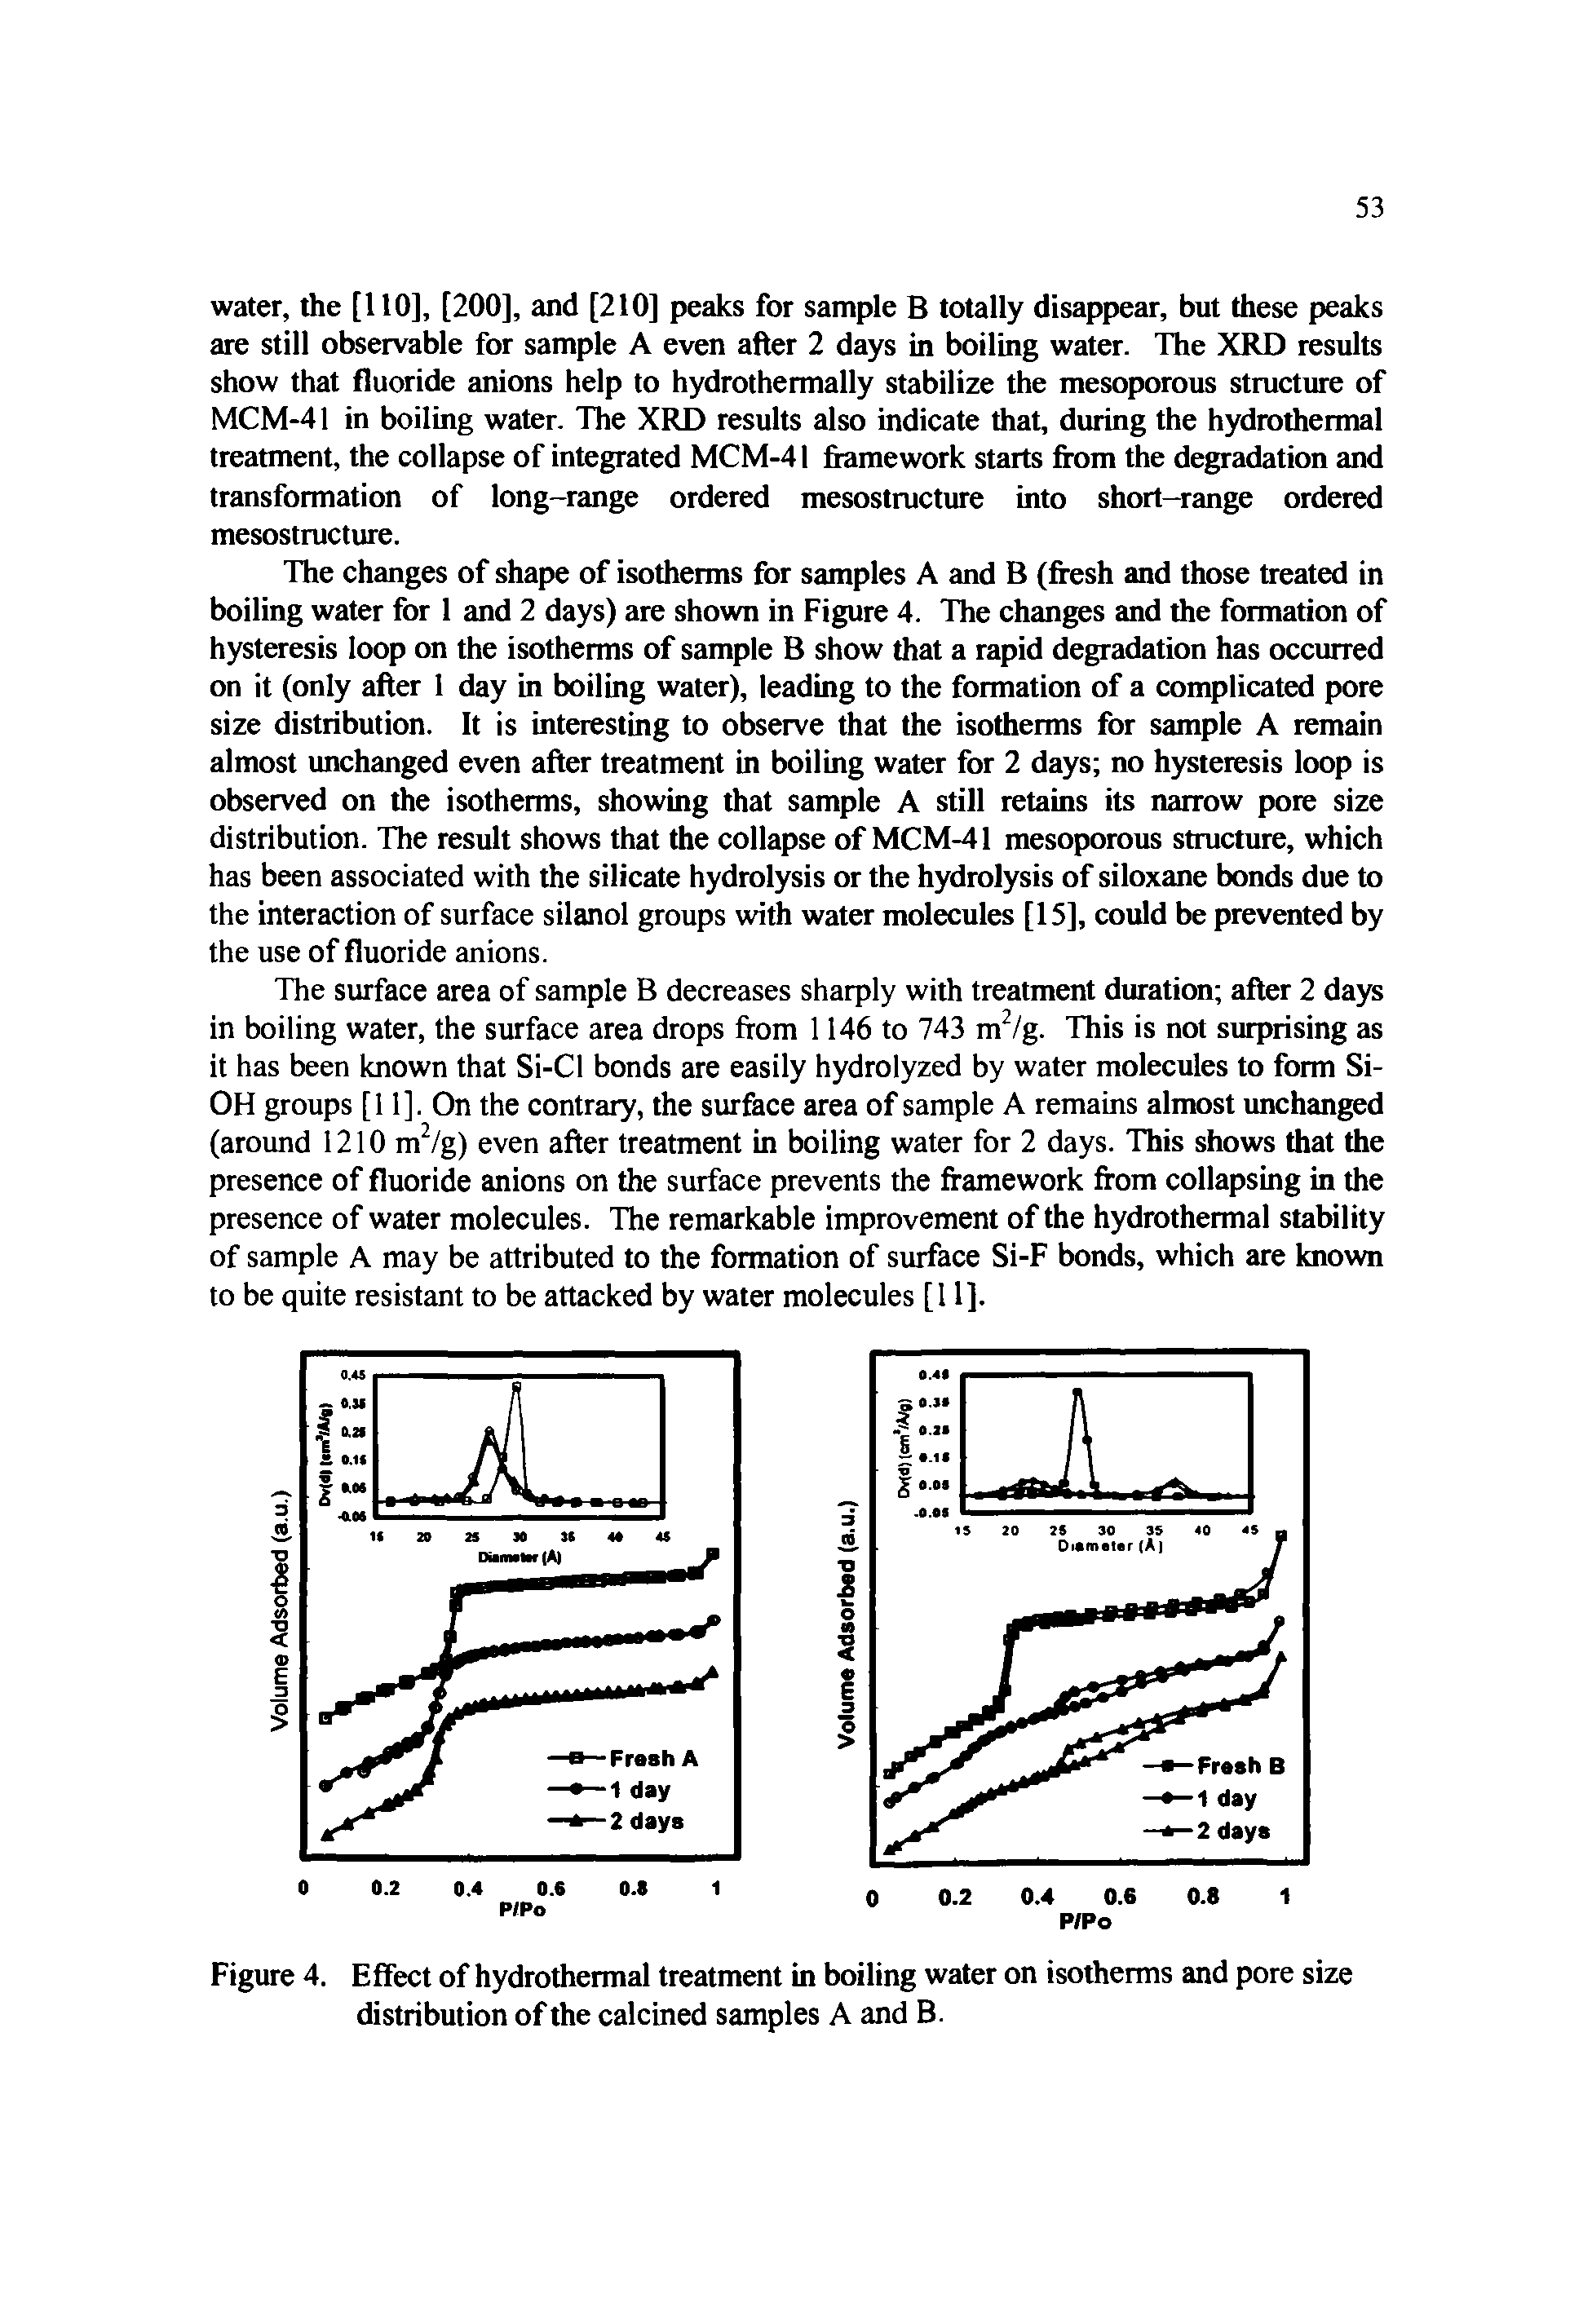 Figure 4. Effect of hydrothermal treatment in boiling water on isotherms and pore size distribution of the calcined samples A and B.